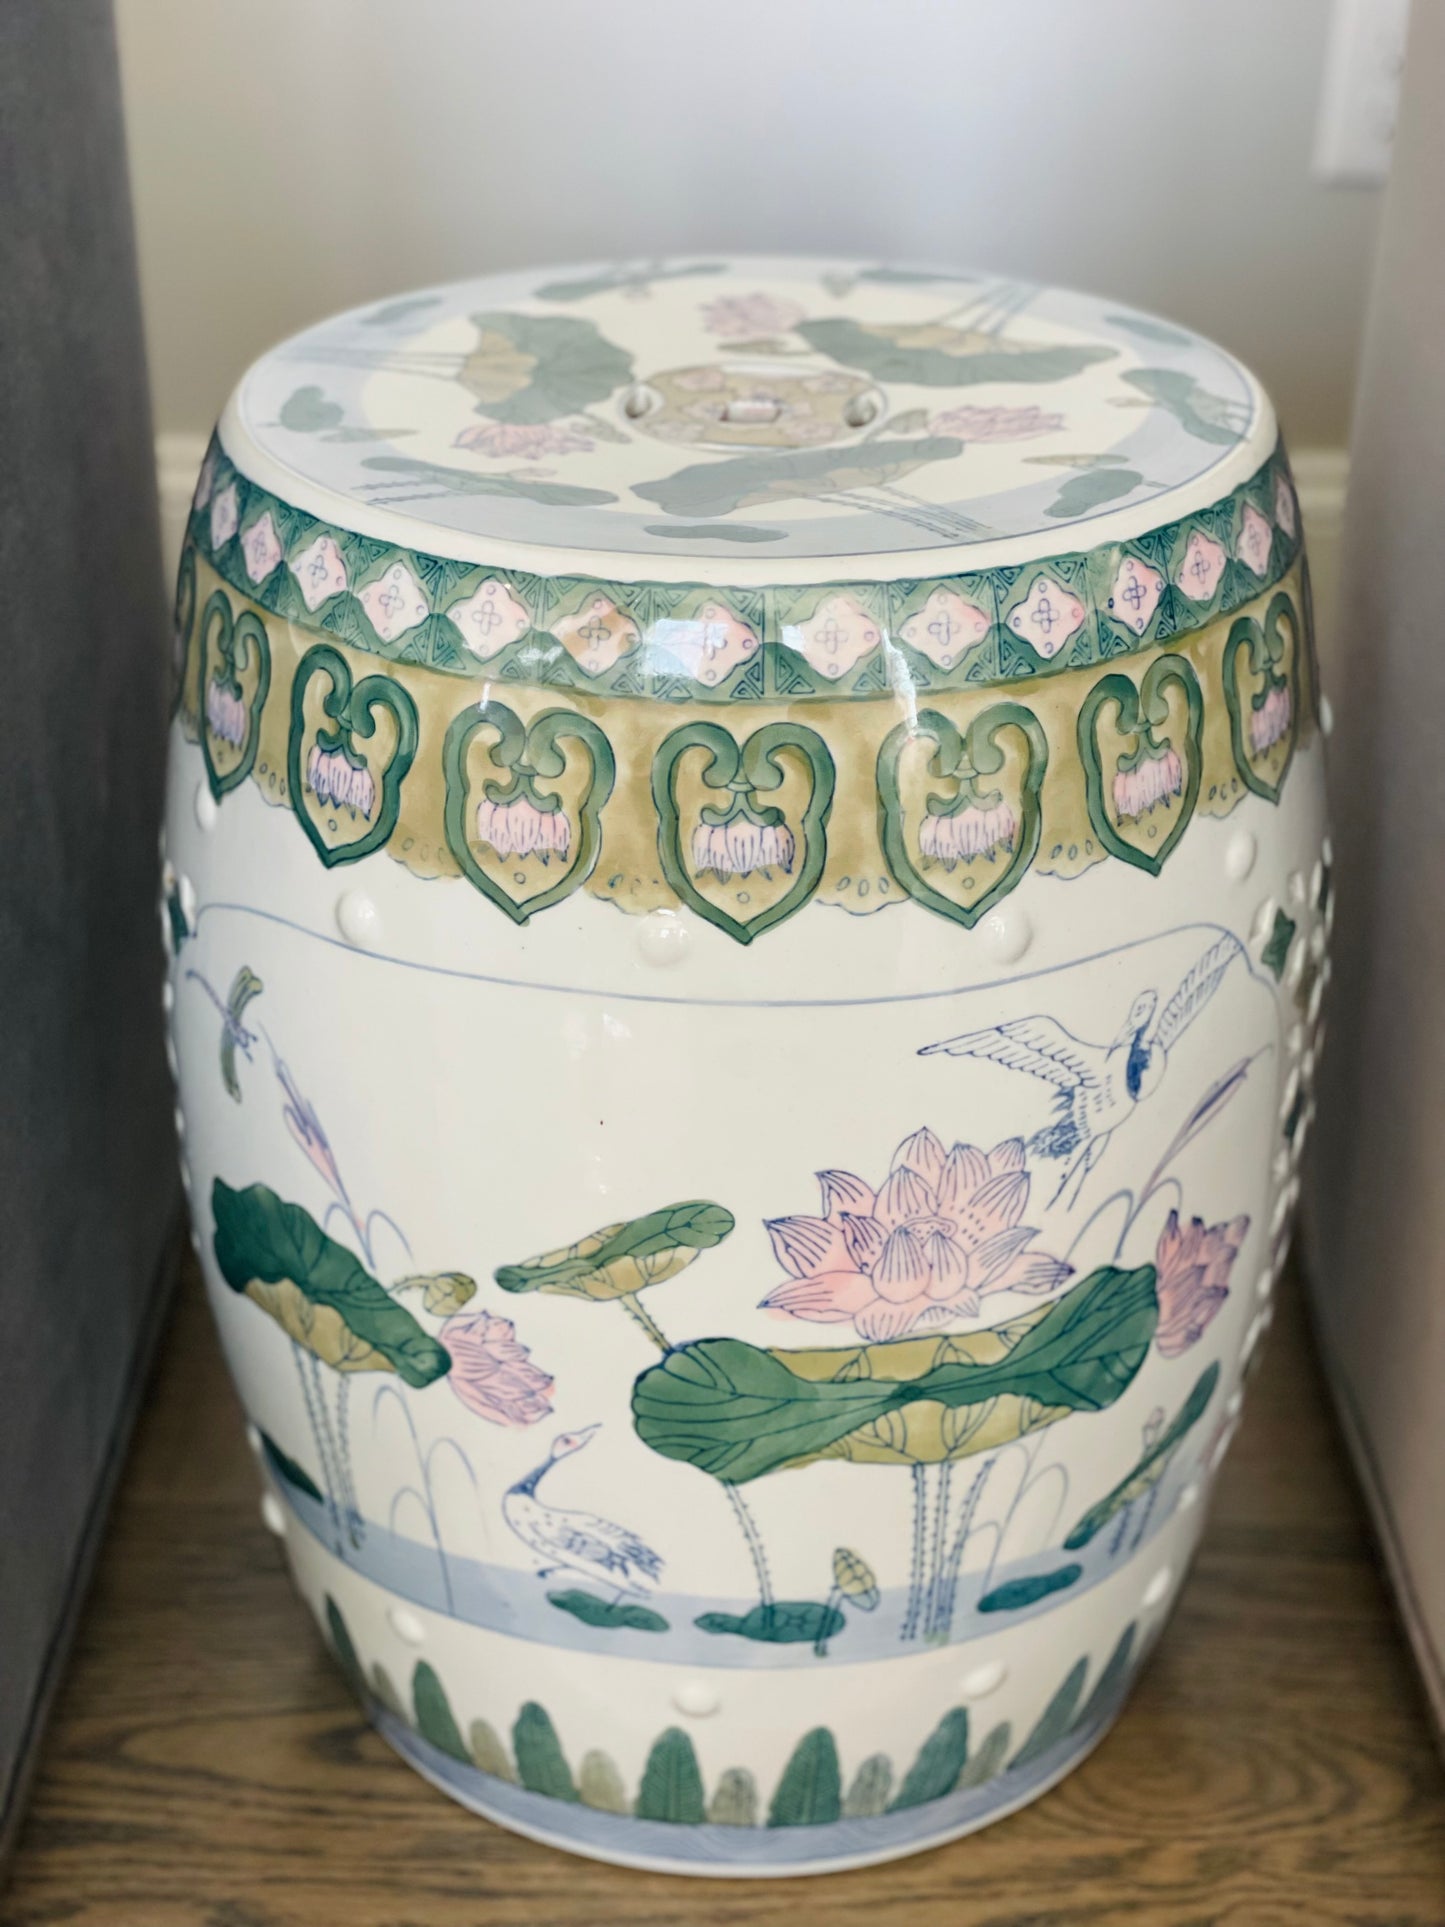 Vintage Porcelain Hand-Painted 18” Floral Chinoiserie Garden Stool - Pristine!